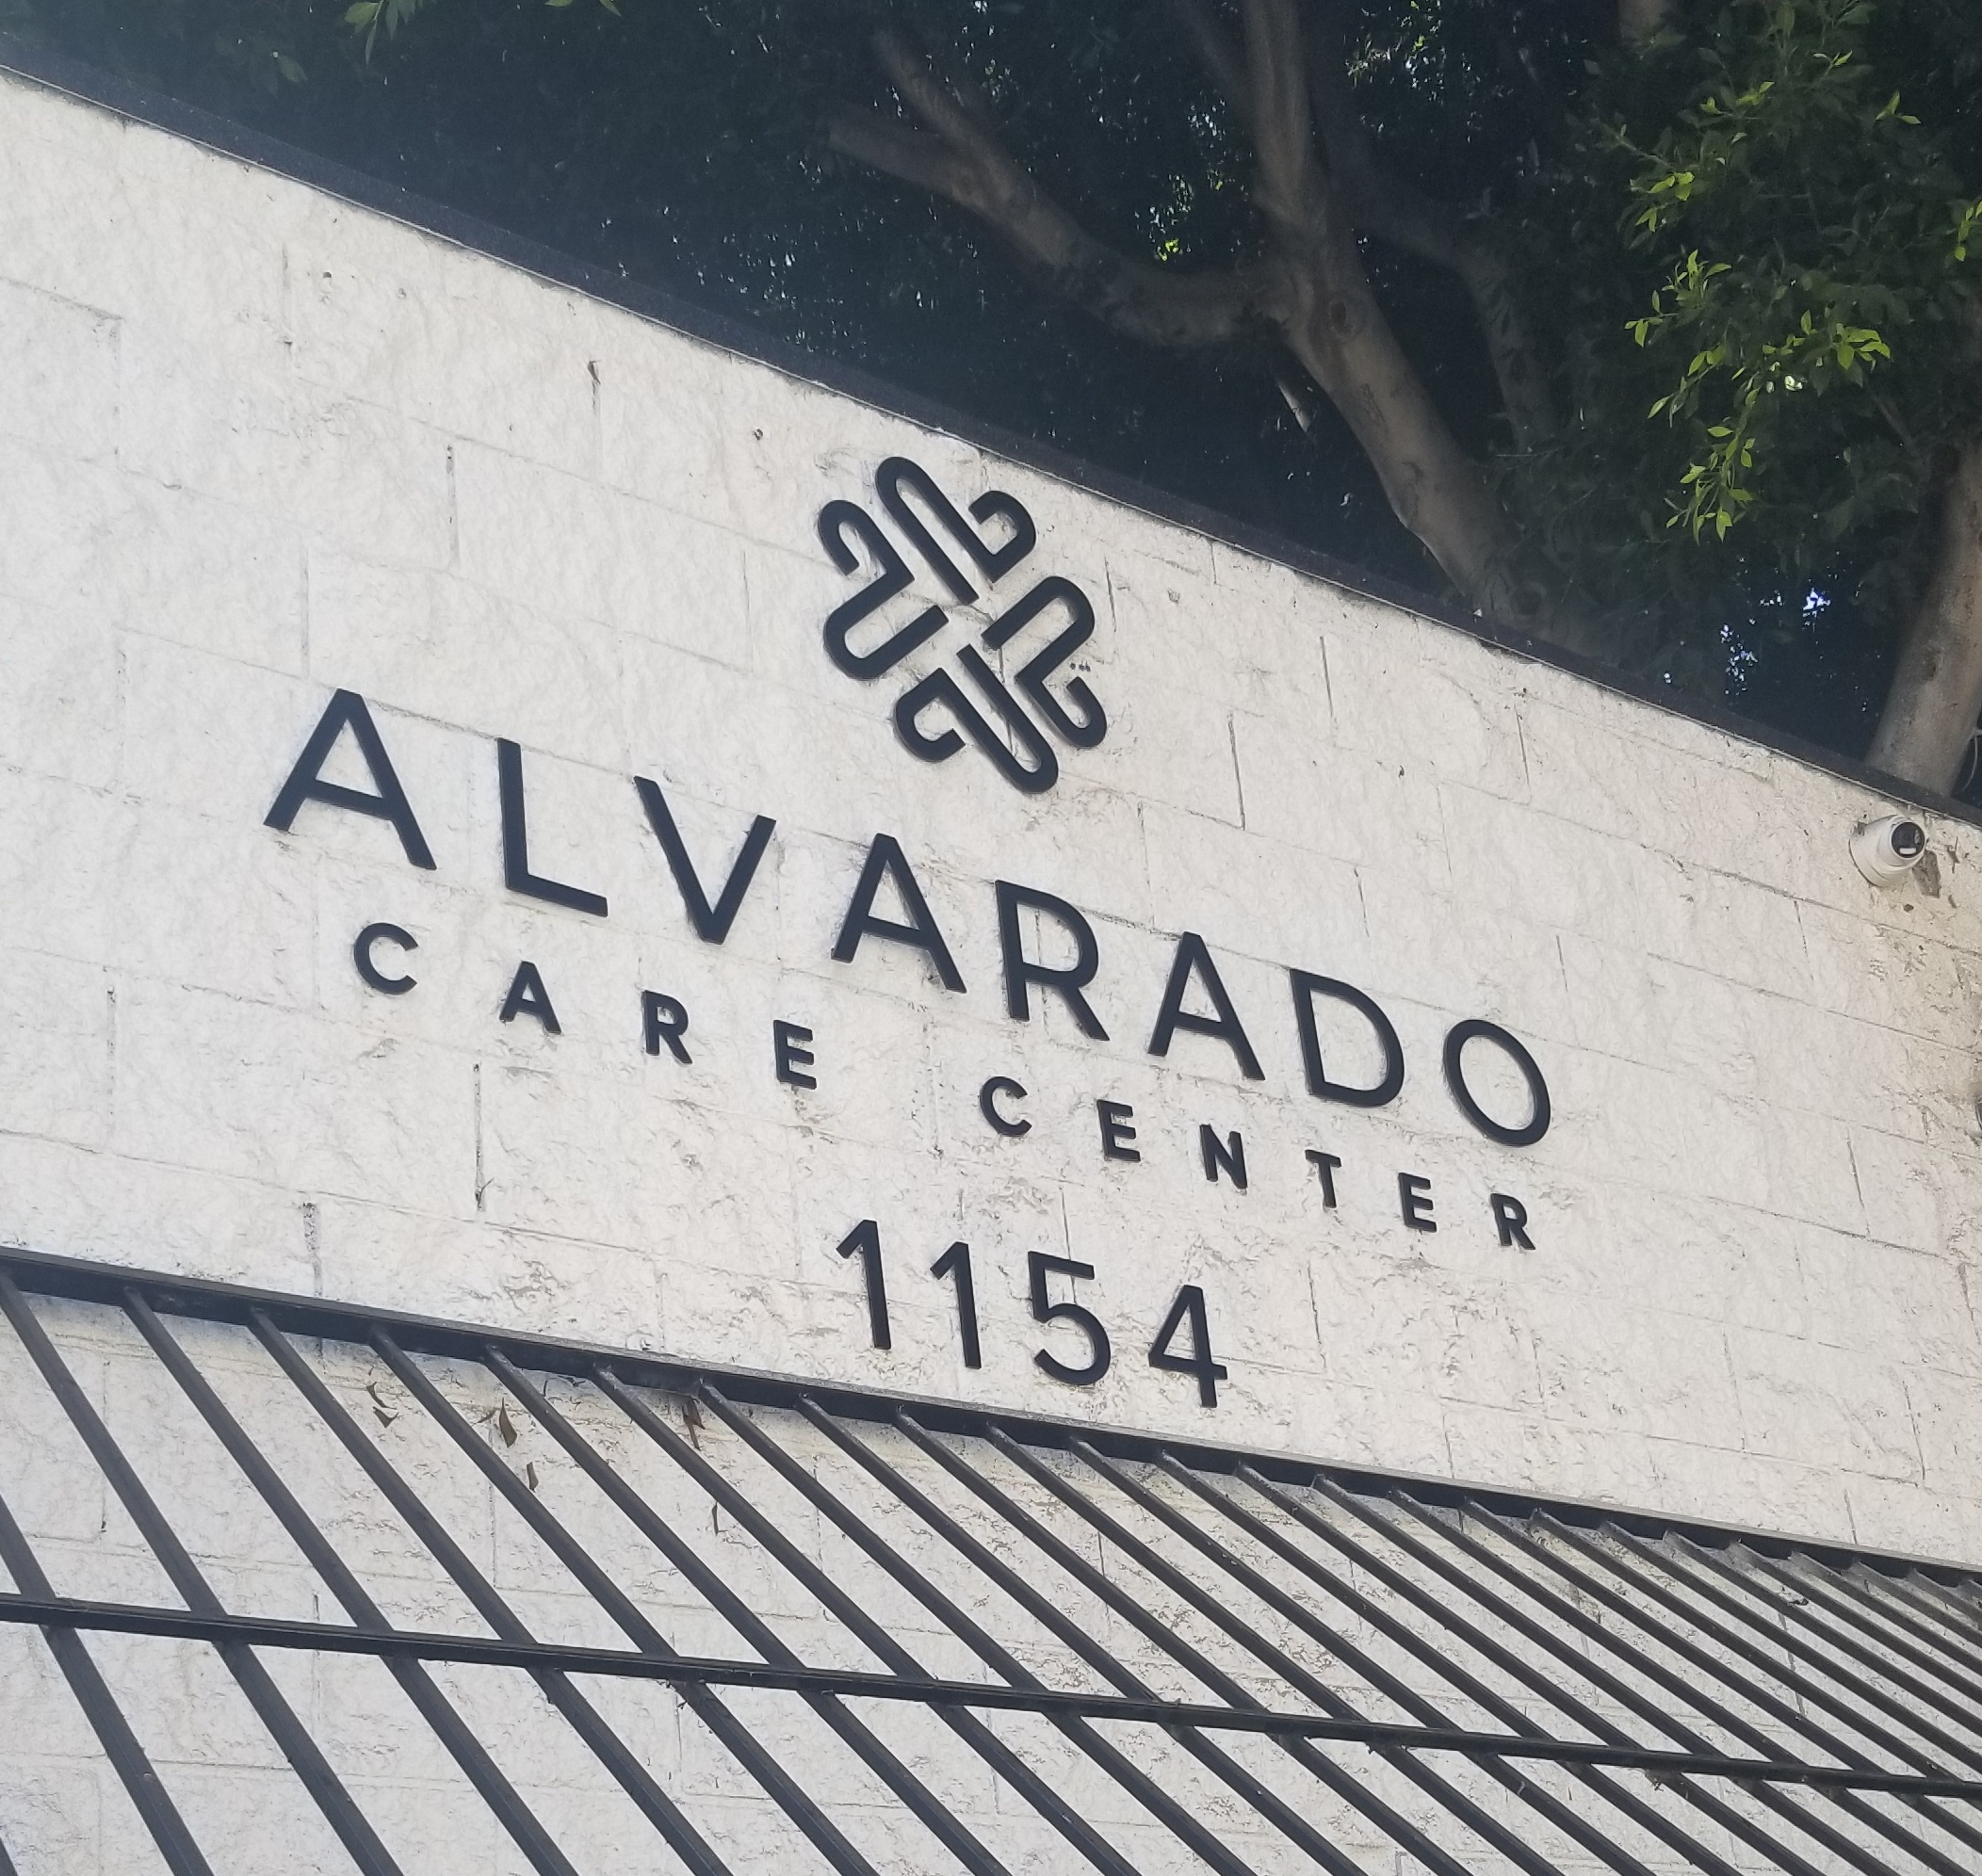 Project quality of your staff and services with impeccable signage, like the clinic dimensional lettering we installed for Alvarado Care Center in Los Angeles.